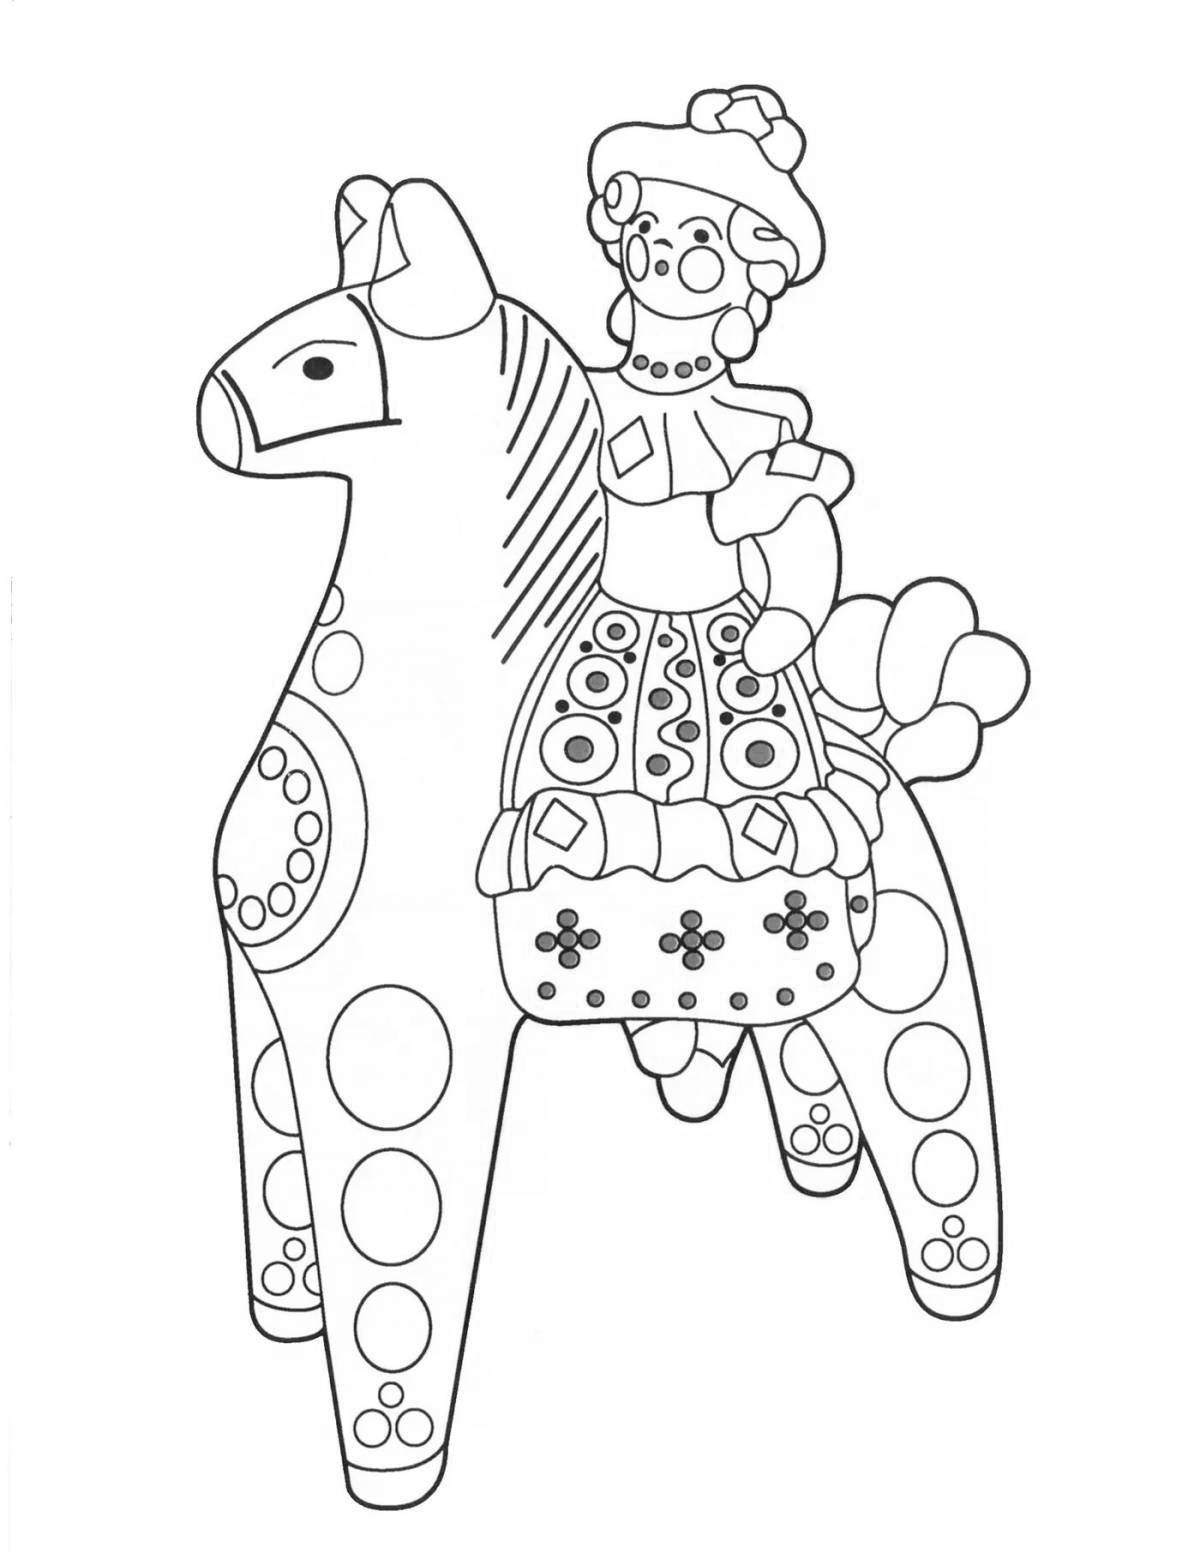 Coloring fairytale Dymkovo horse for children